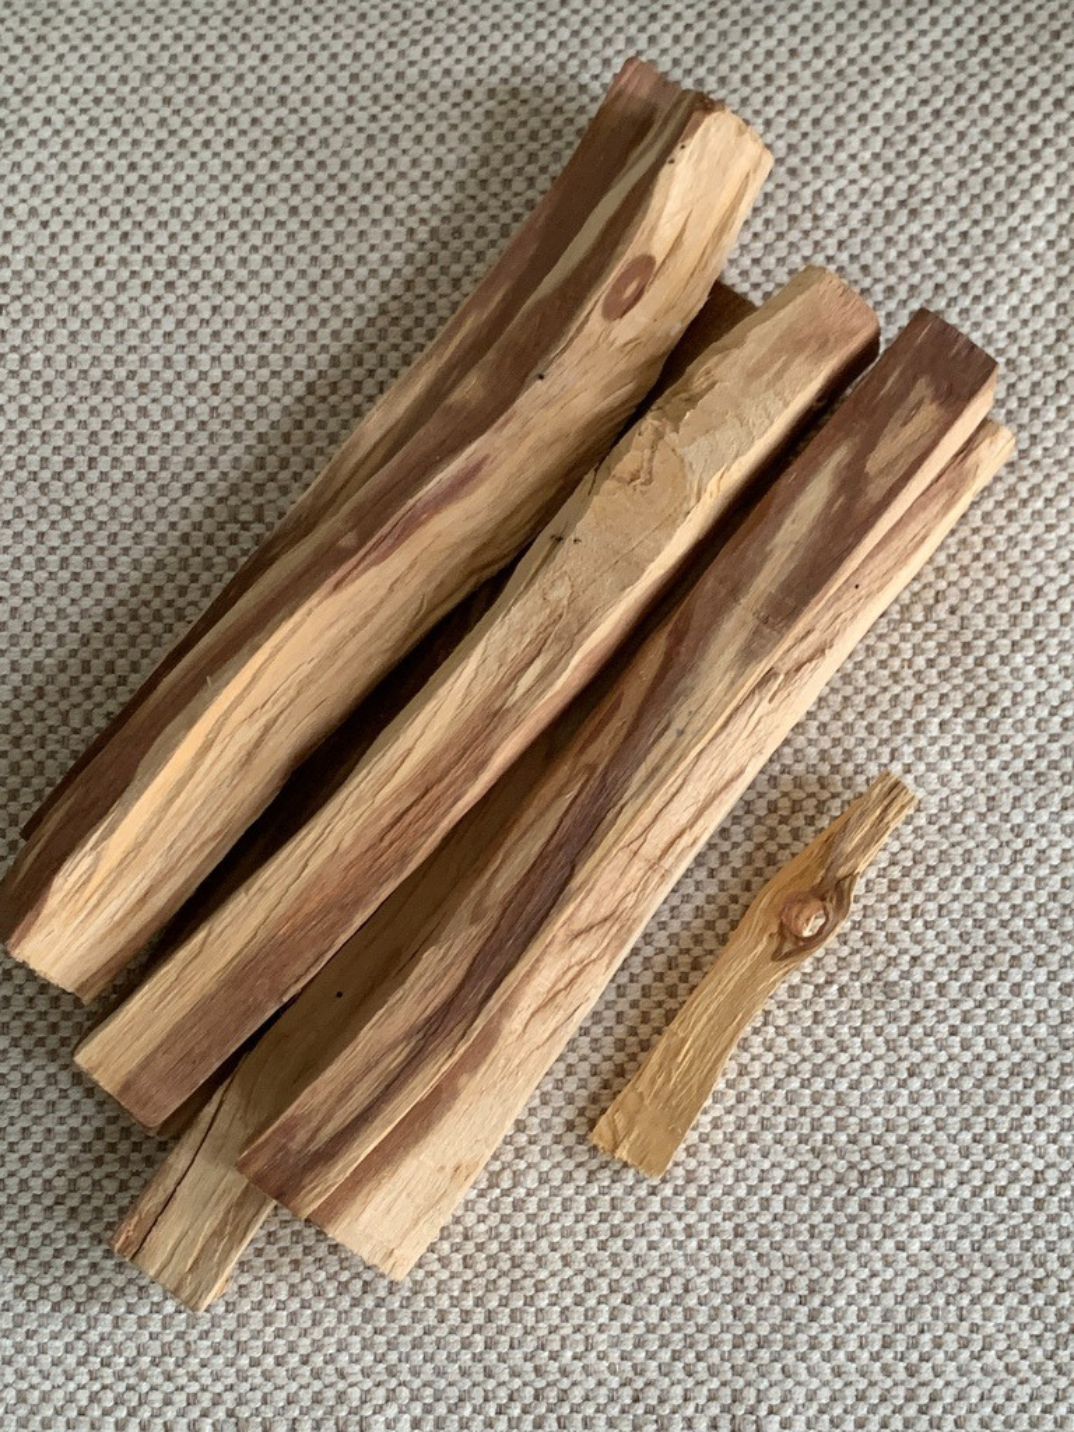 Burn Palo Santo sticks at home or in your office to help clear the air and refresh your space.